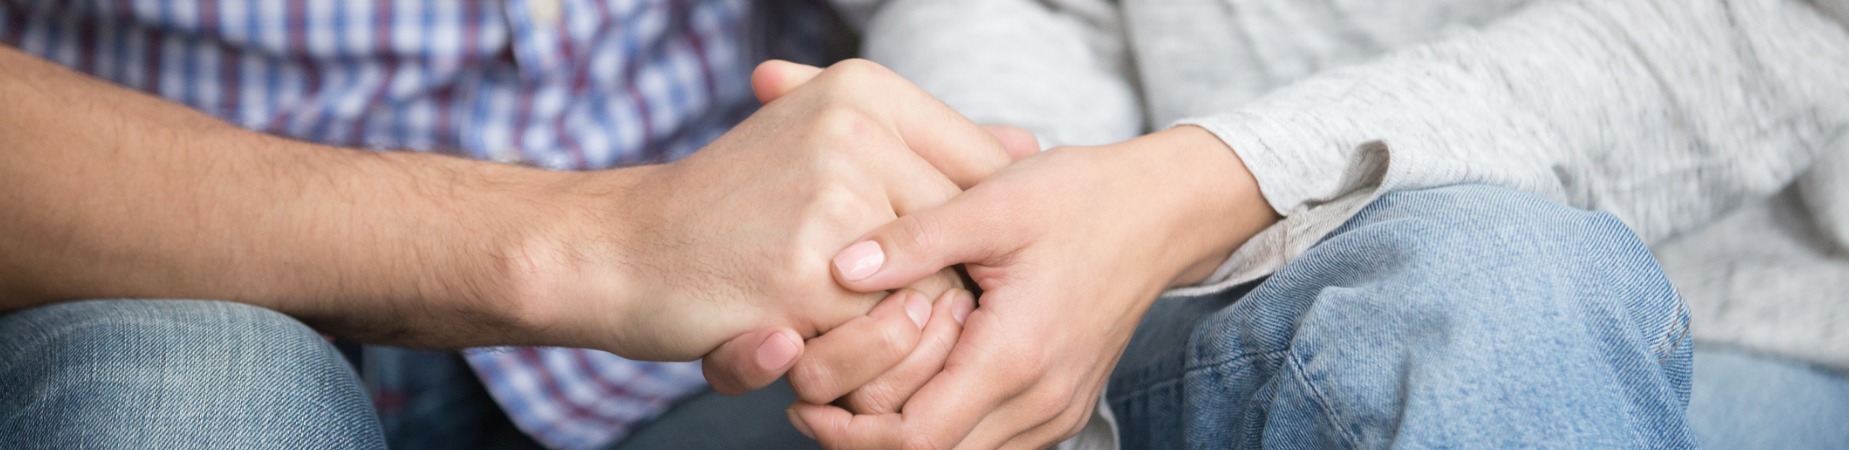 support-in-marriage-concept-close-up-of-couple-holding-hands-picture 1900x500